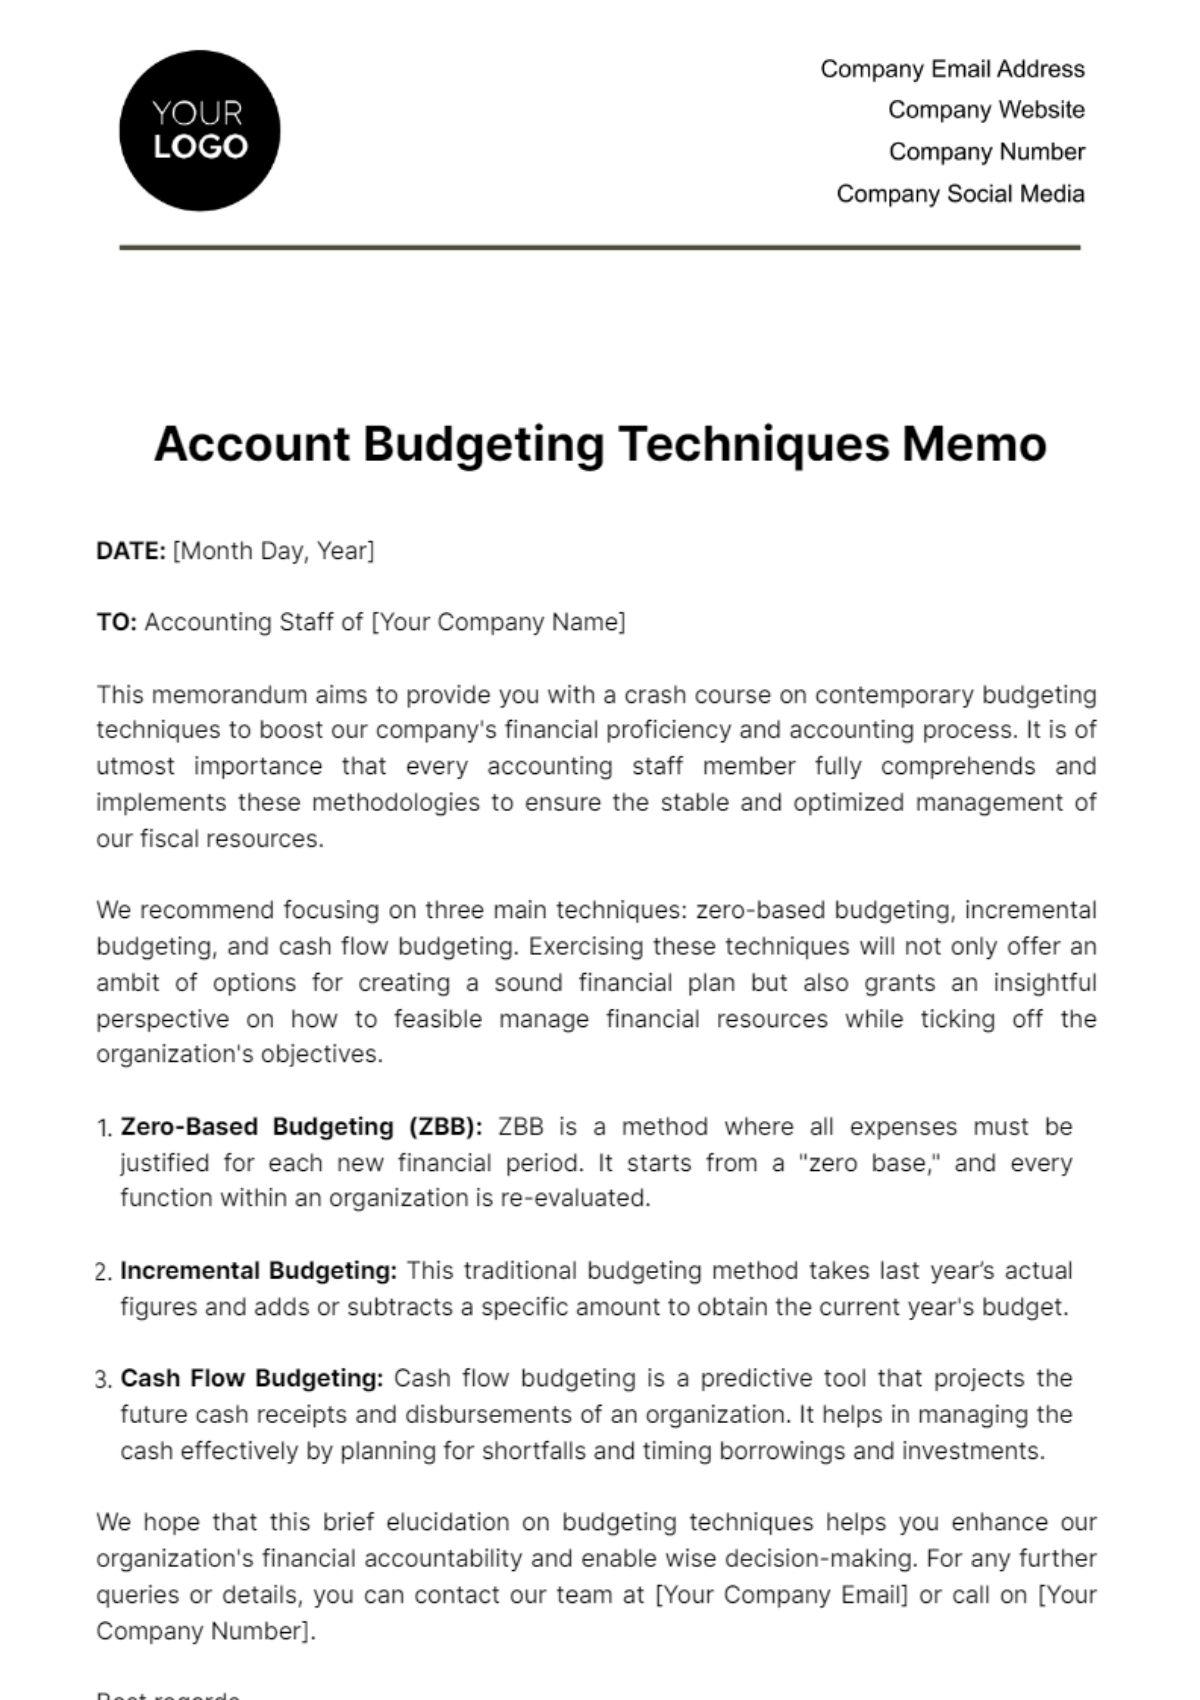 Account Budgeting Techniques Memo Template